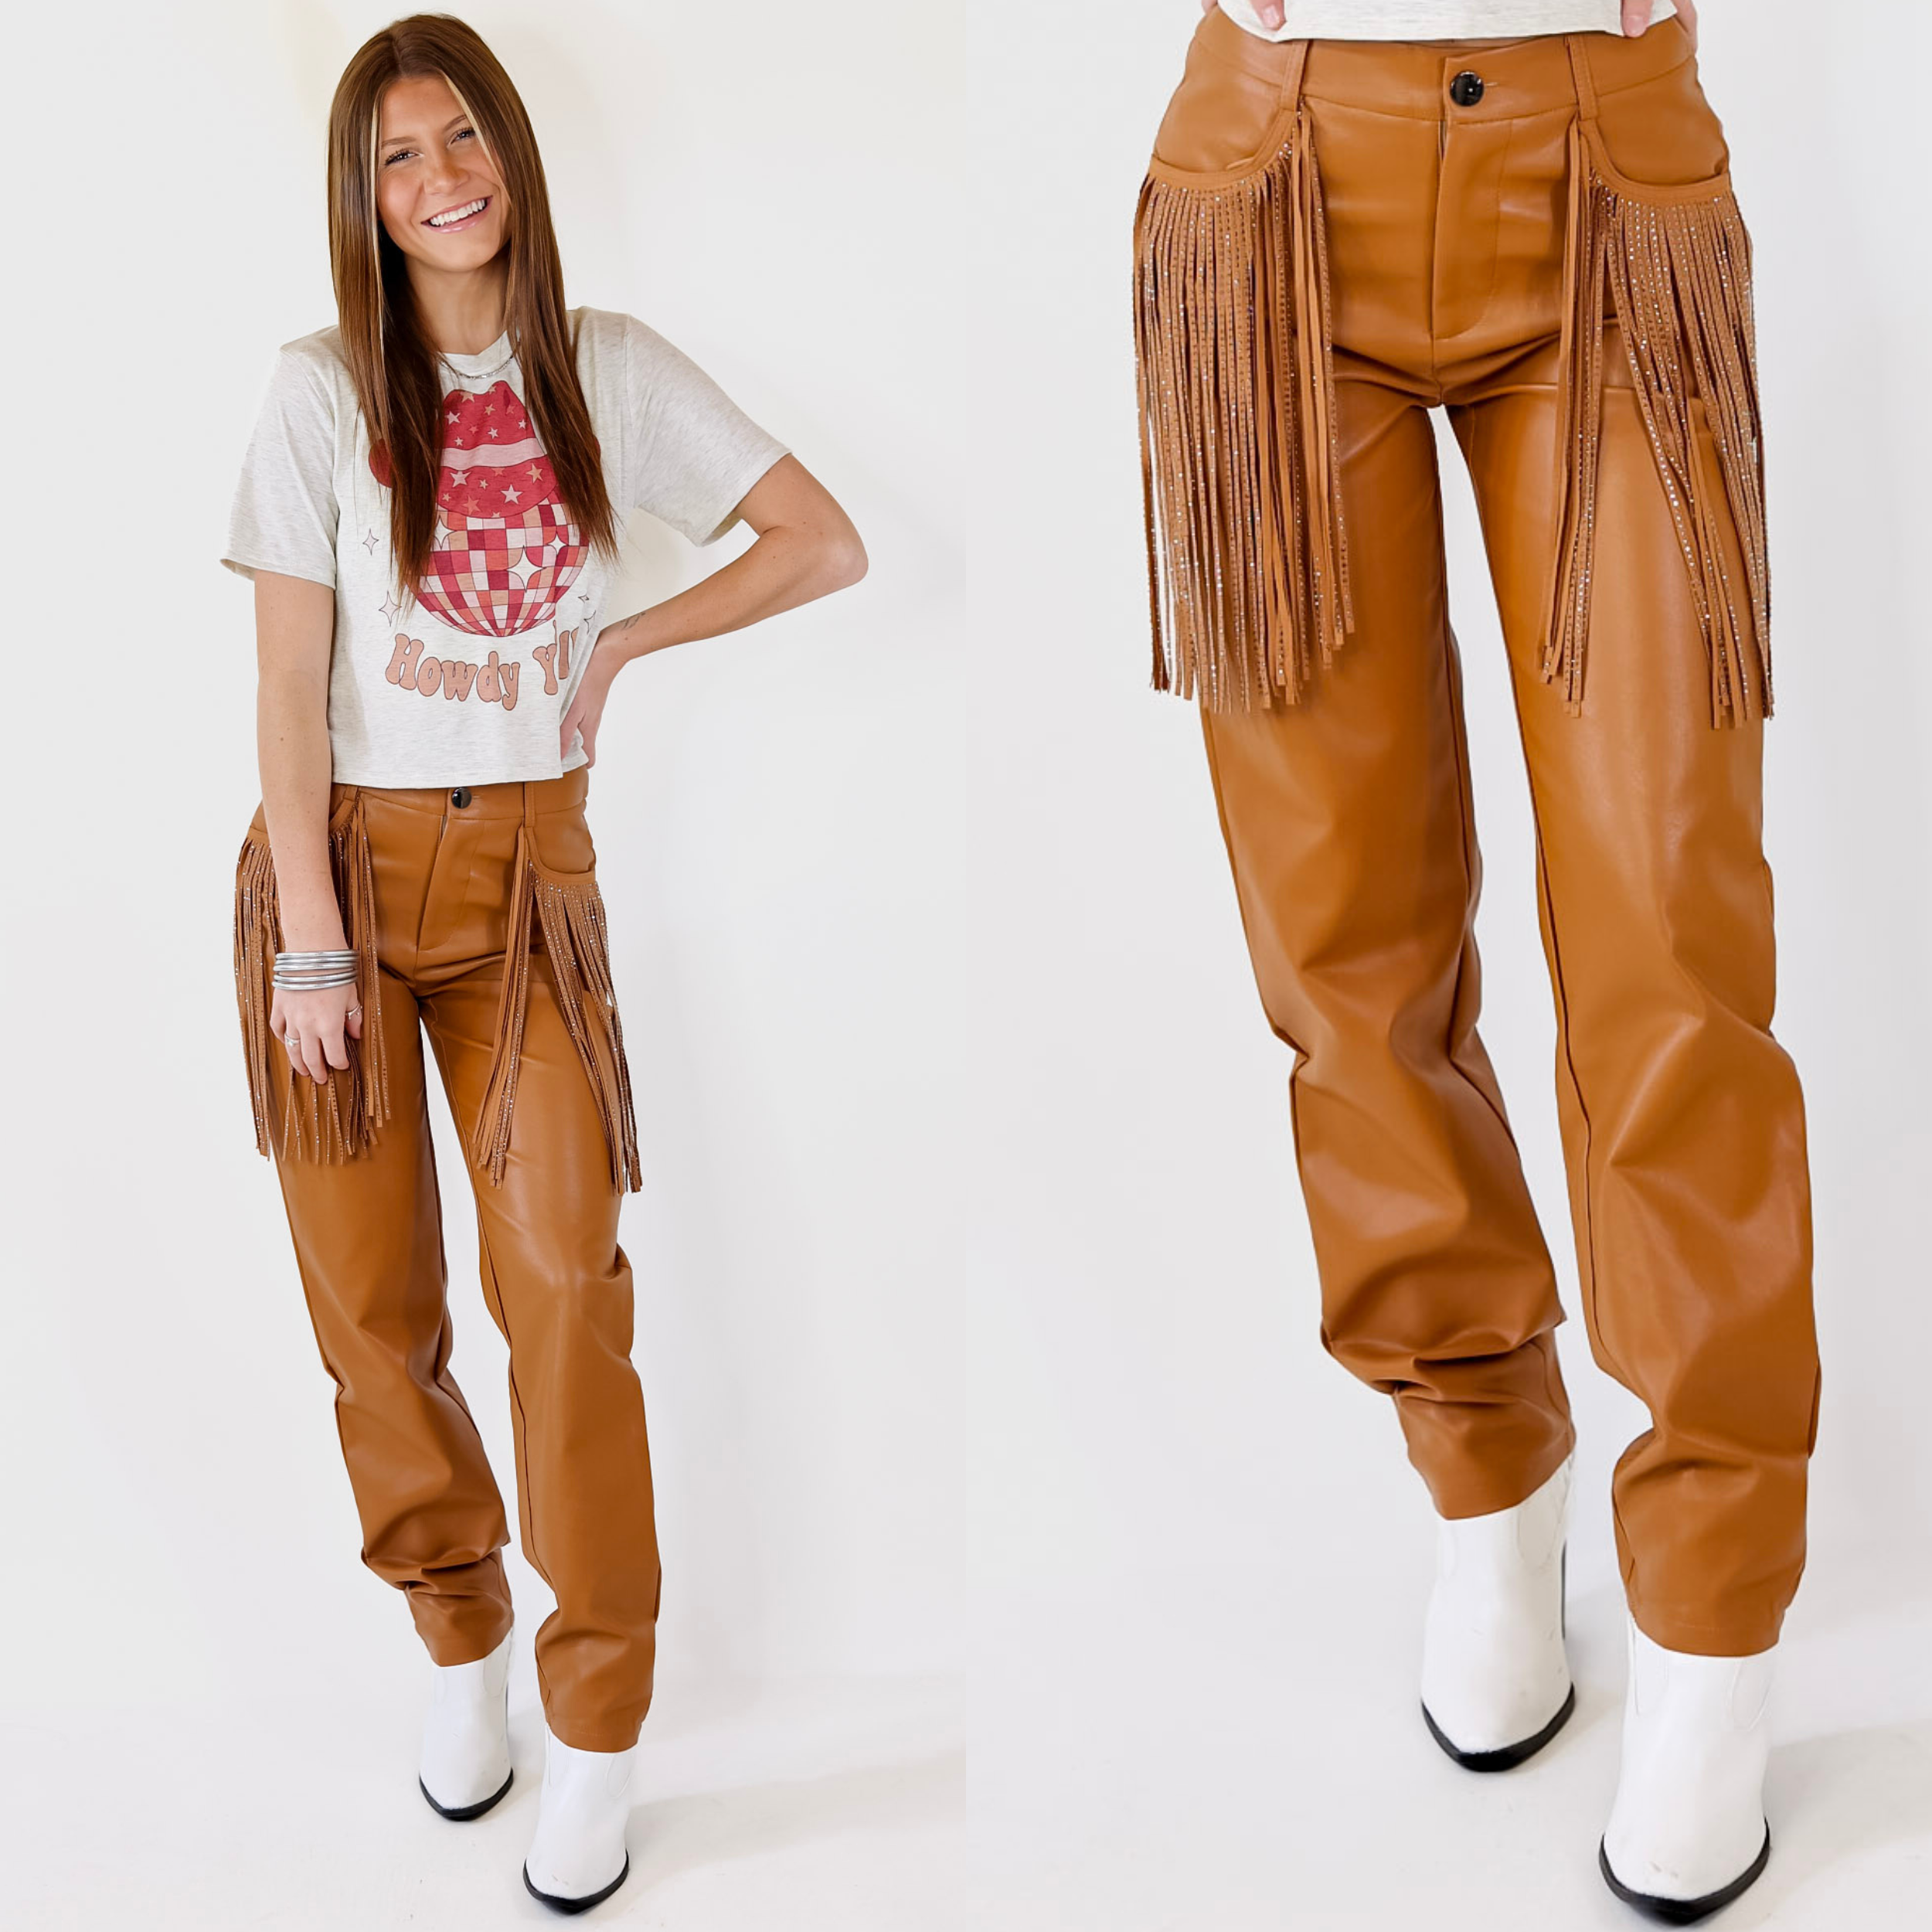 Model is wearing a pair of brown faux leather pants with a straight leg fit and crystal fringe lining the front pockets.